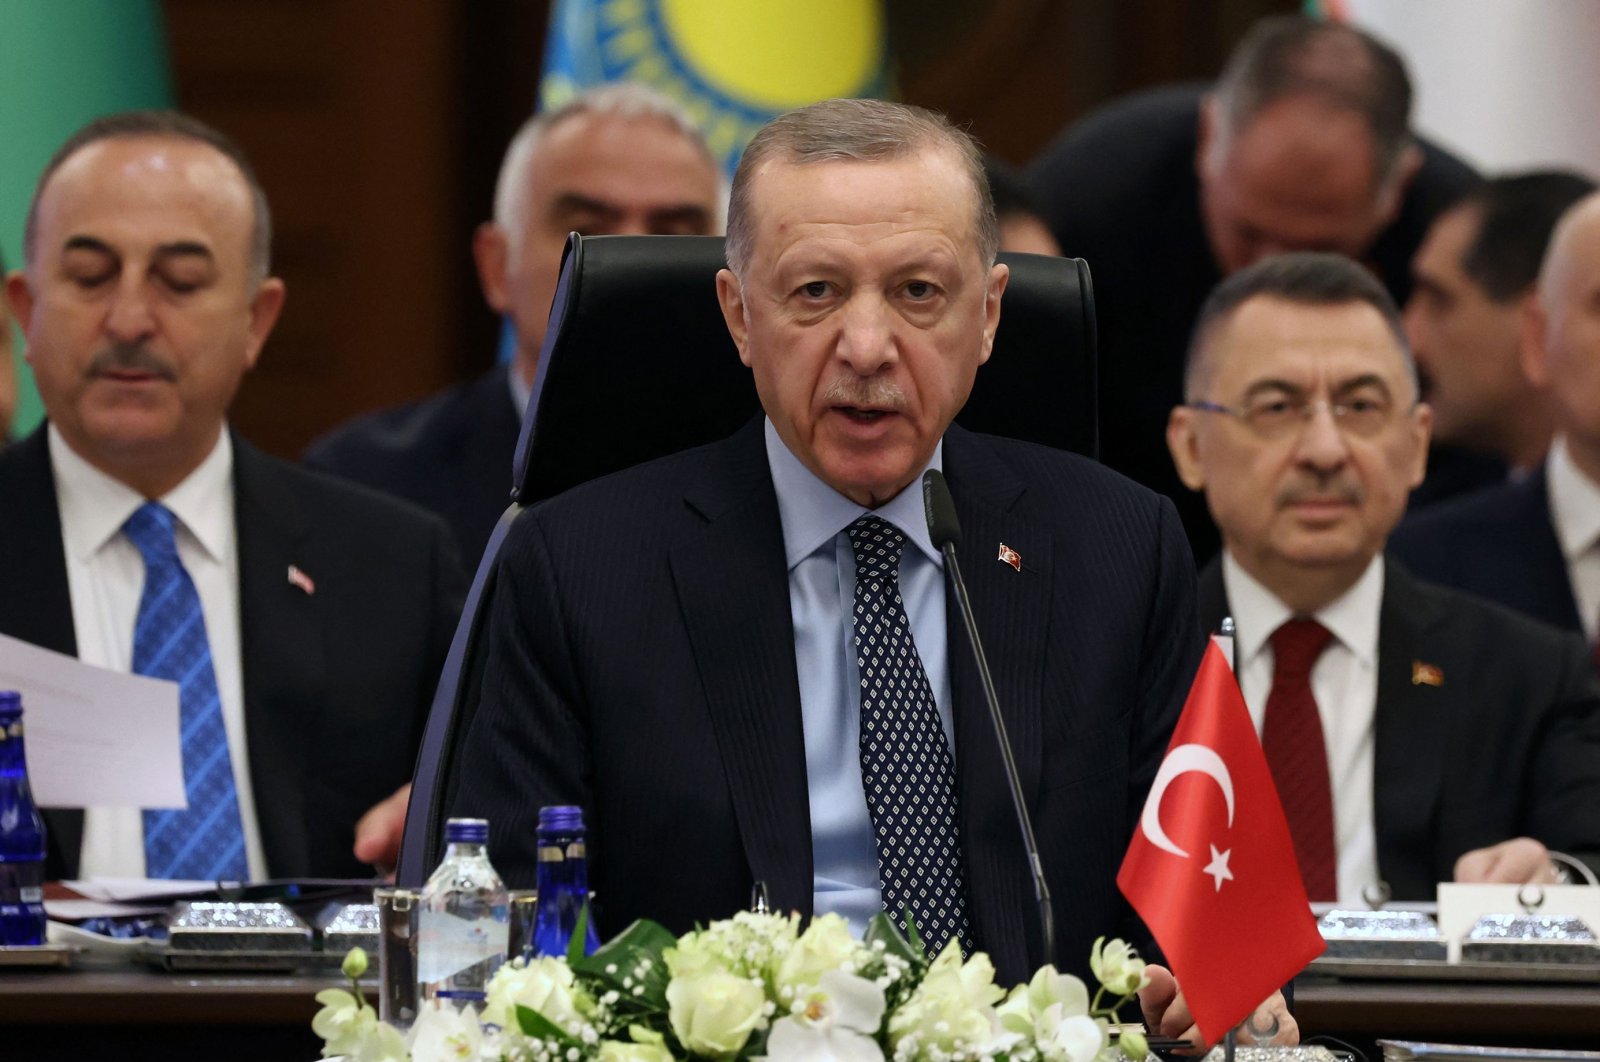 President Recep Tayyip Erdoğan speaks during an Extraordinary Summit of the Heads of State of the Organization of Turkic States (OTS), in Ankara, on March 16, 2023. (AFP Photo)